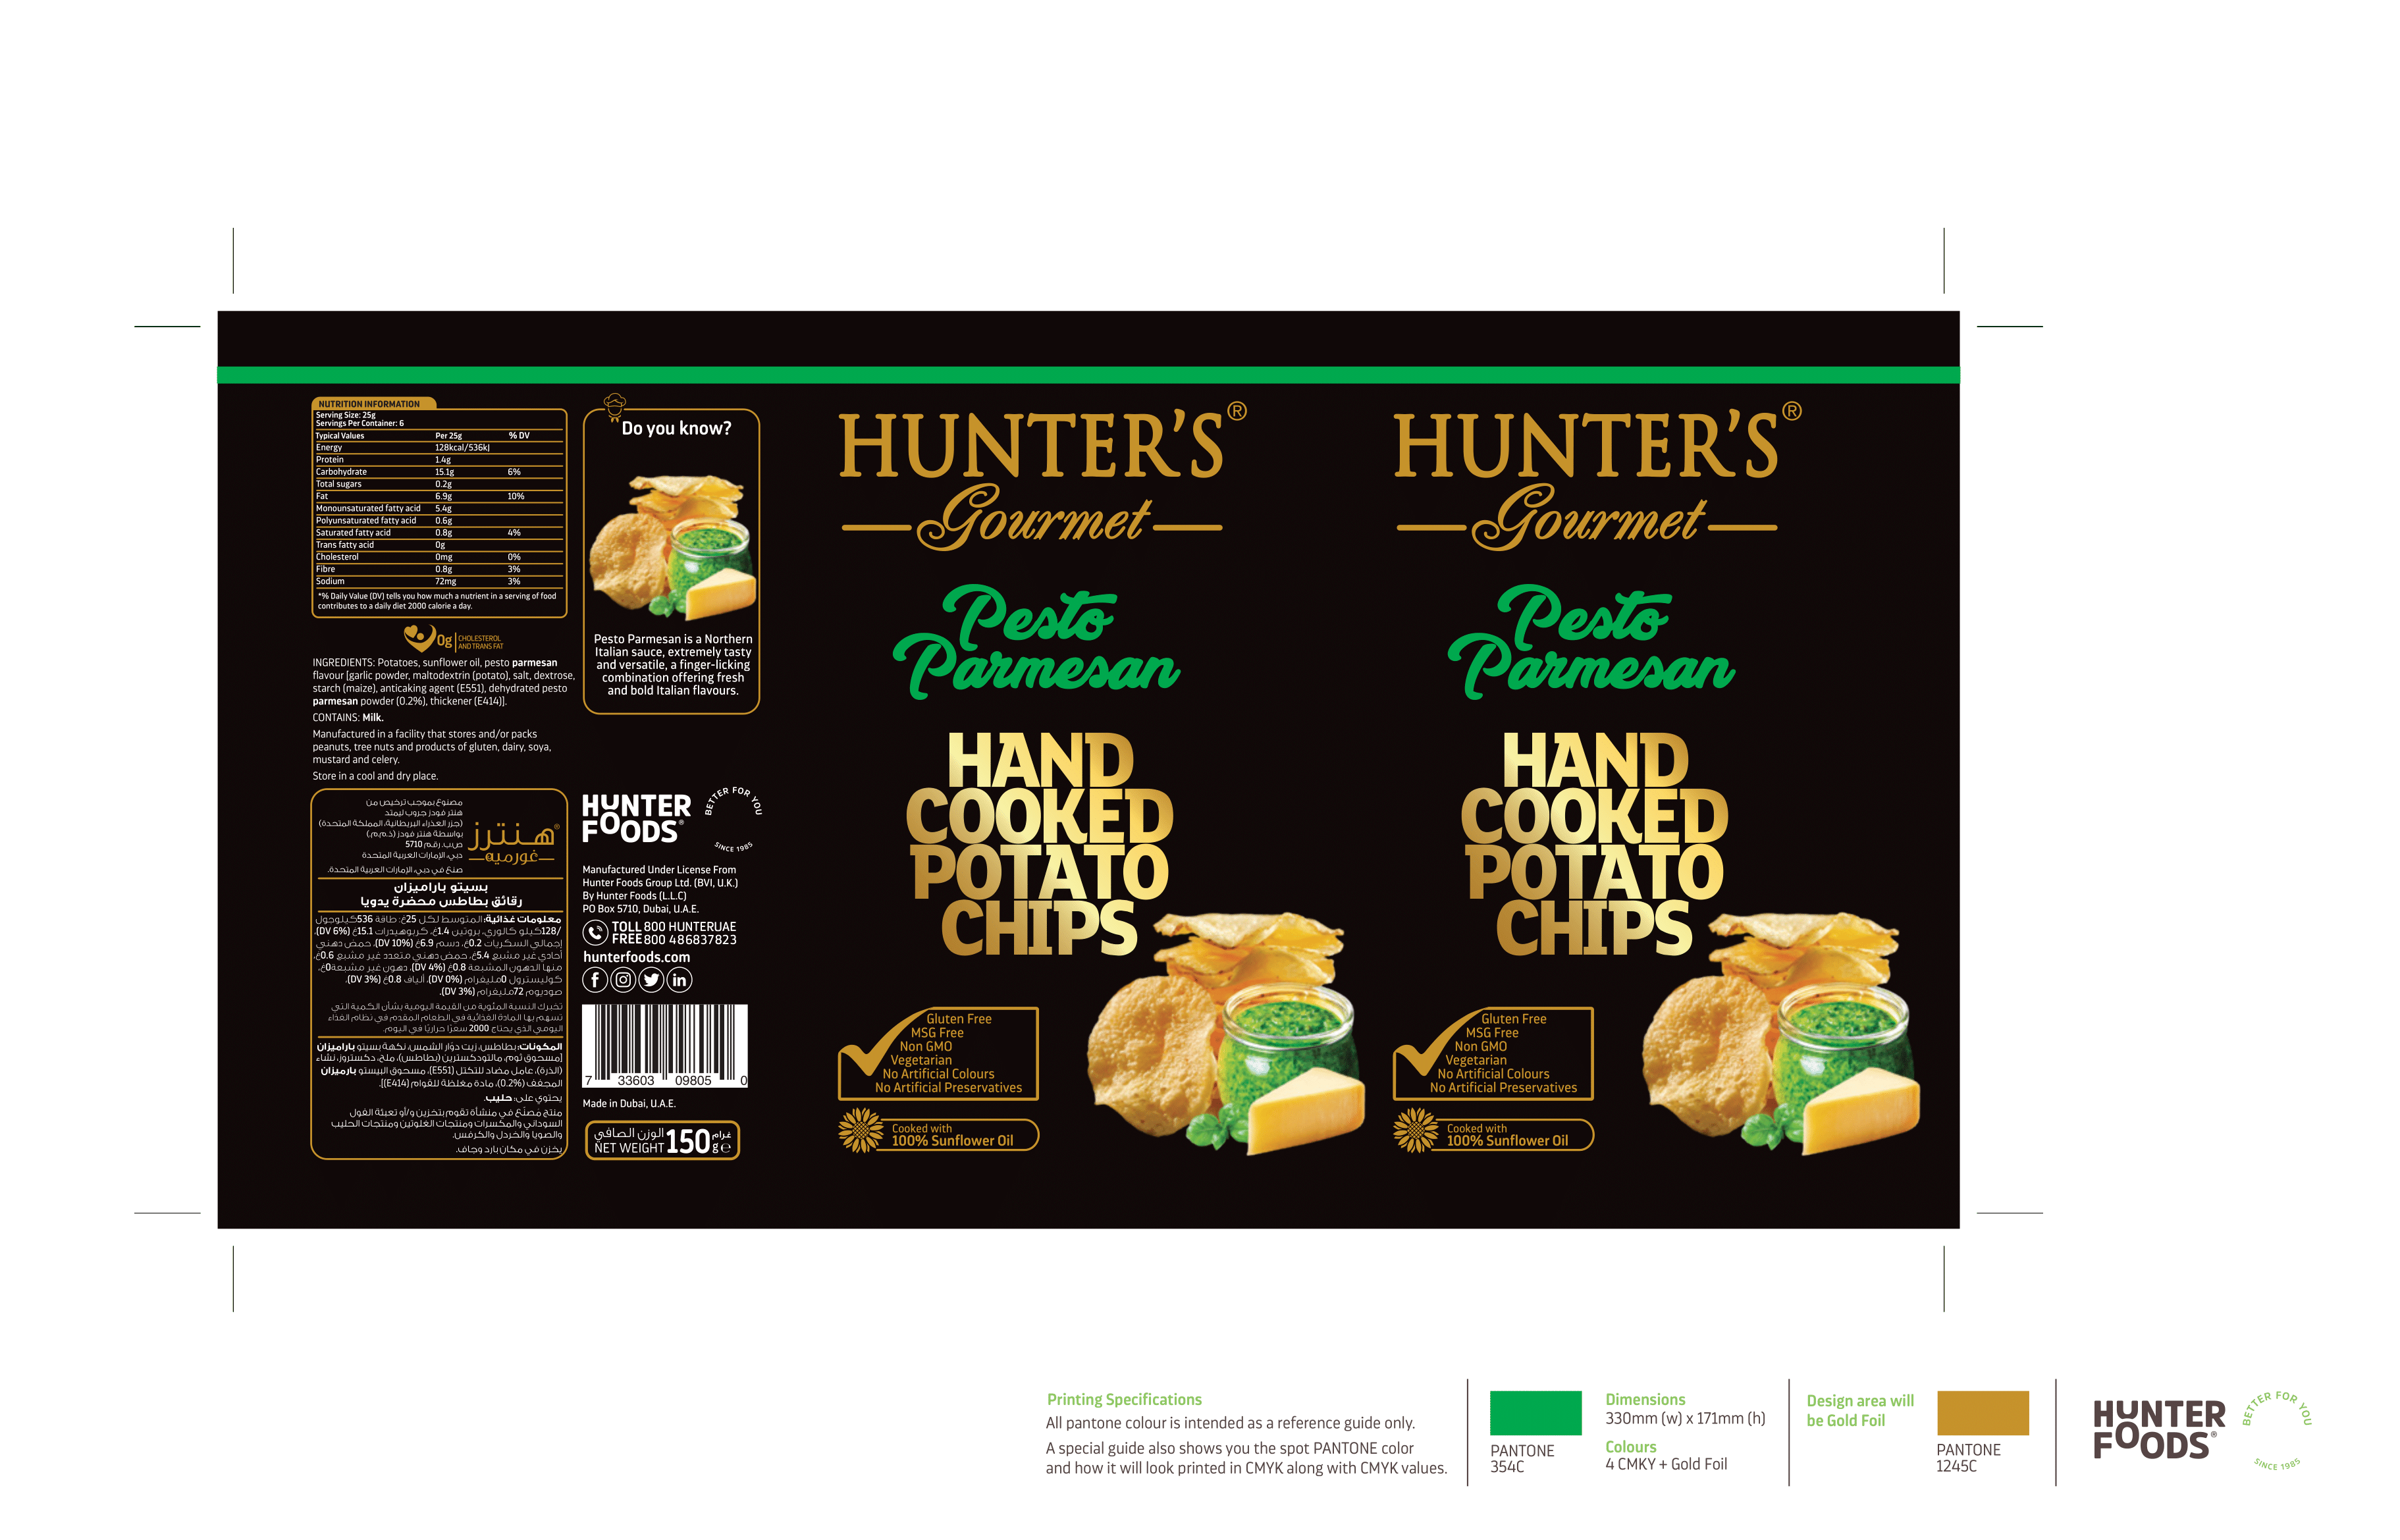 Hunter's Gourmet Hand Cooked Potato Chips Pesto Parmesan 12 units per case 150 g Product Label